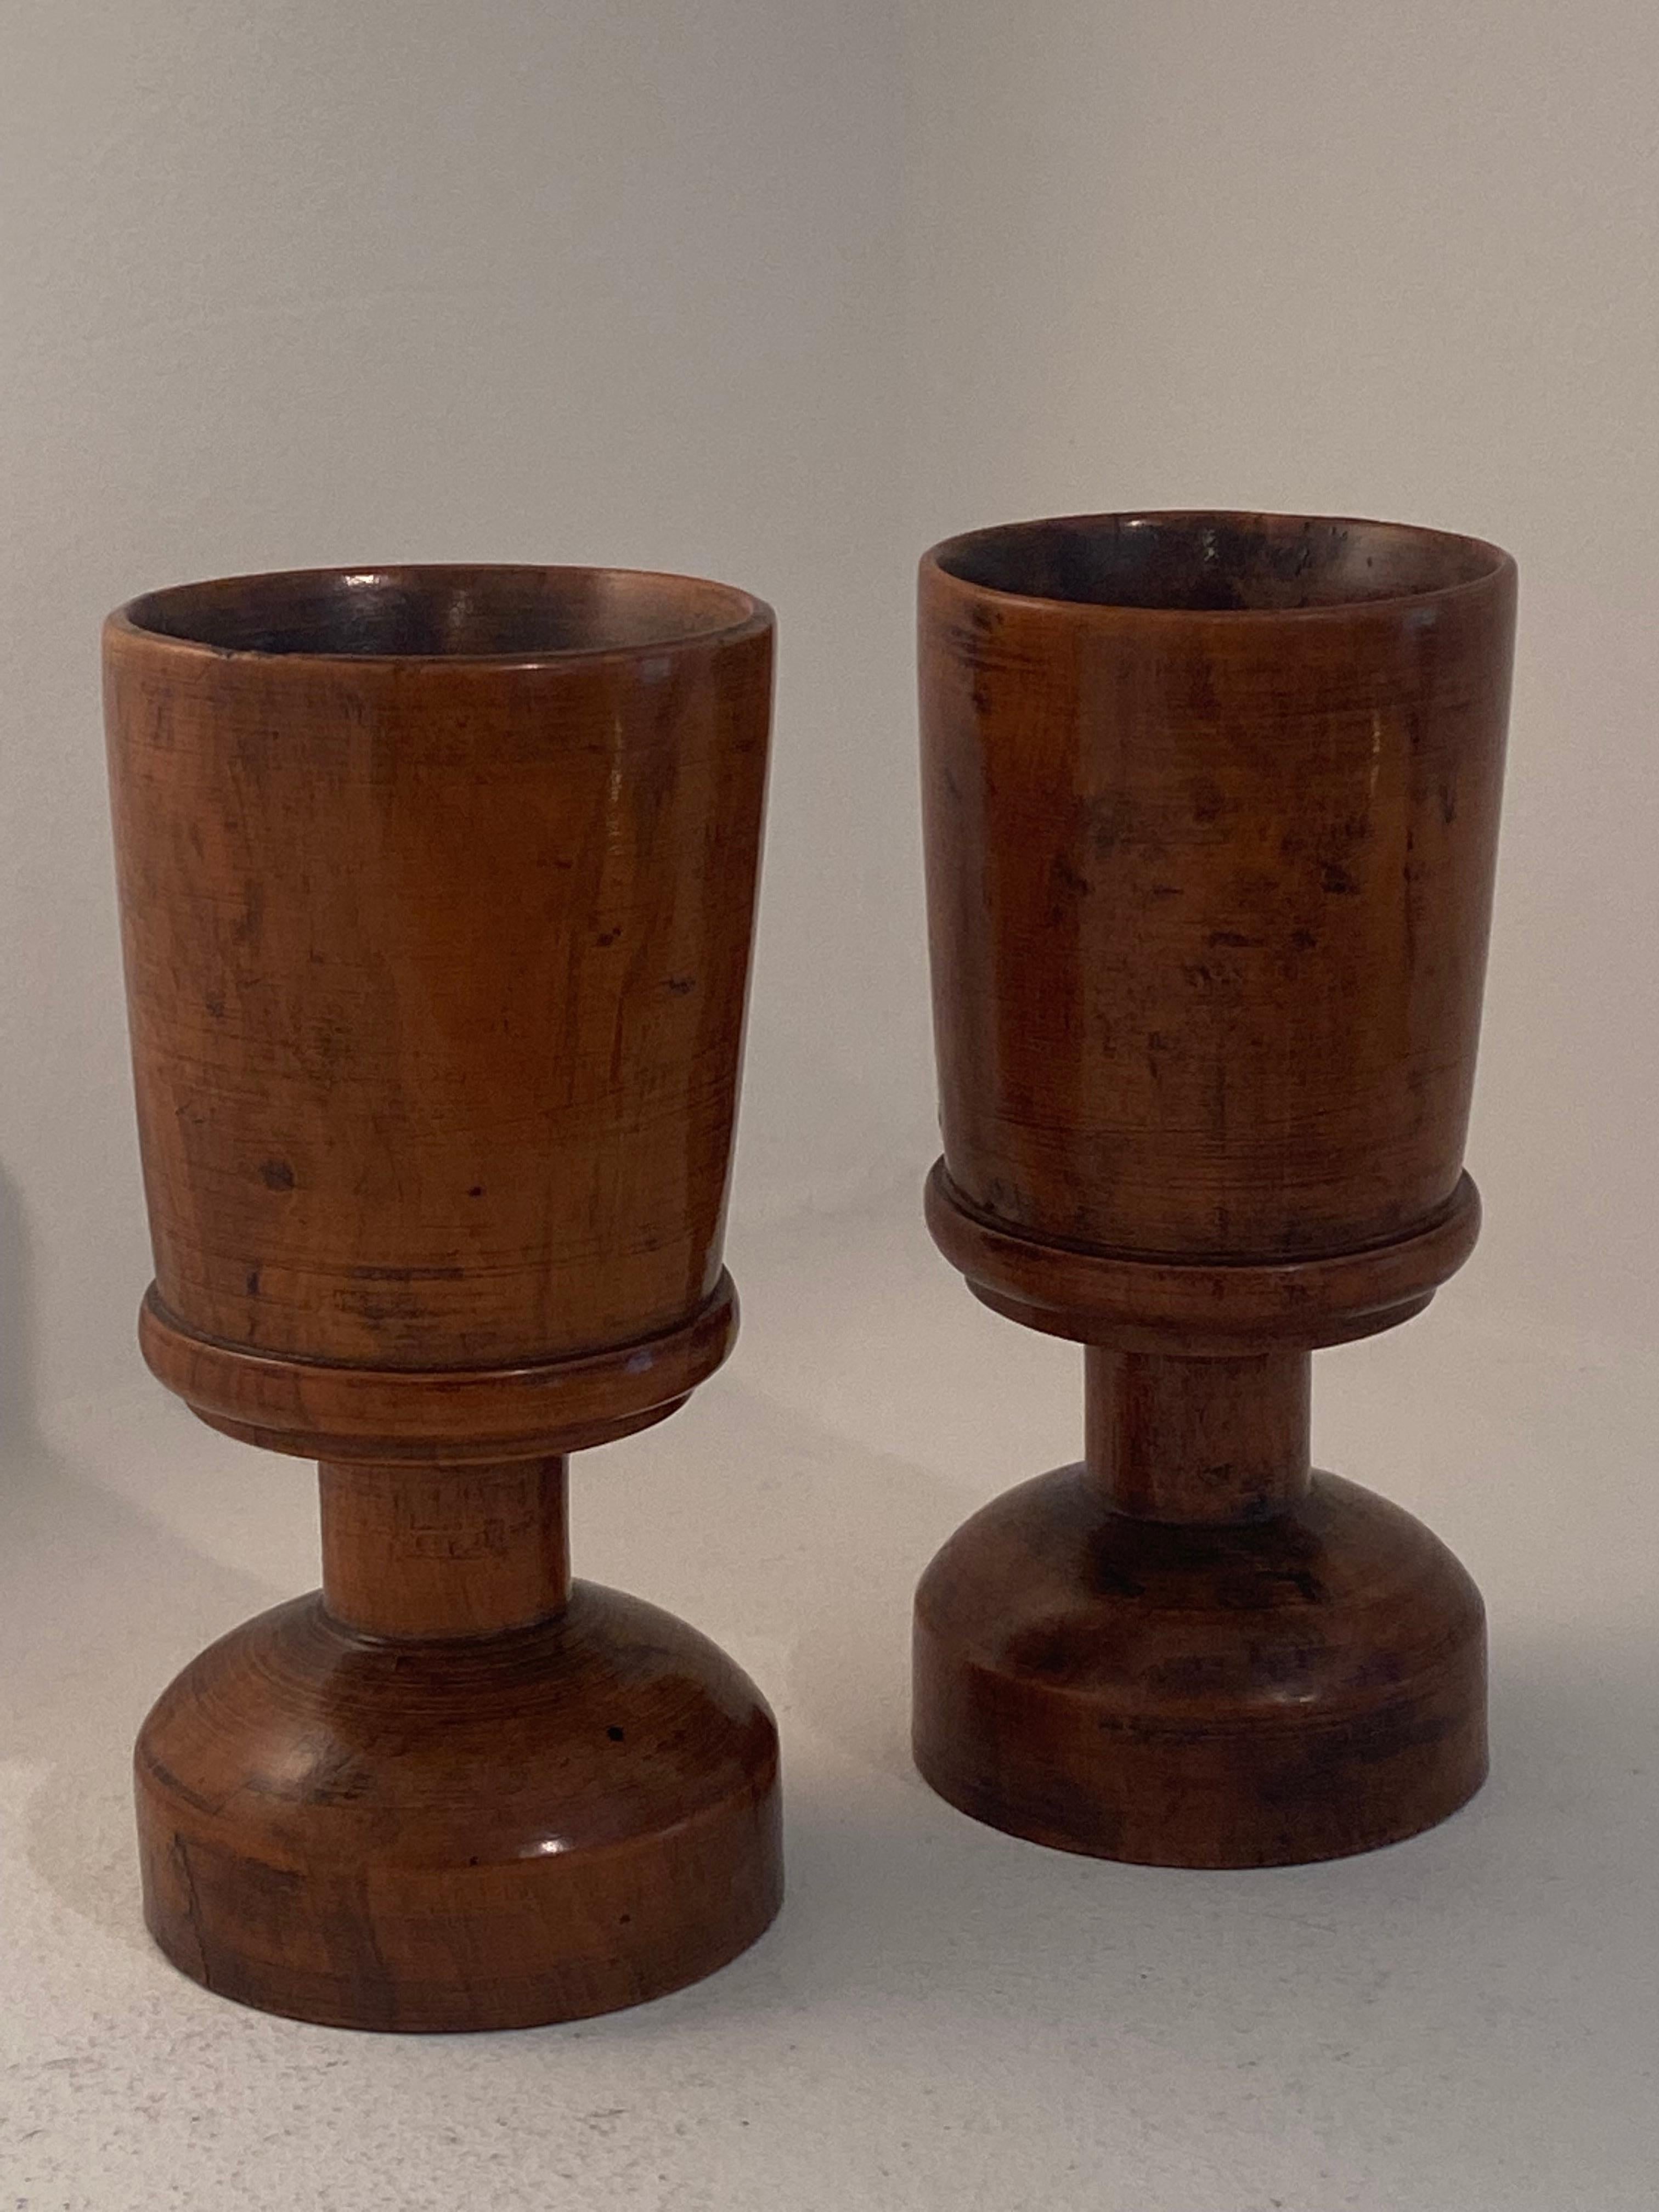 Exceptional pair of Antique English boxwood Gobelets-Bekers,
18 th Century, ca 1780,
from the A.J. Levi Collection, nr 830 a & nr 830 b,
the wood has an exquisite patina and warm and worn finish,
a real collectors item.